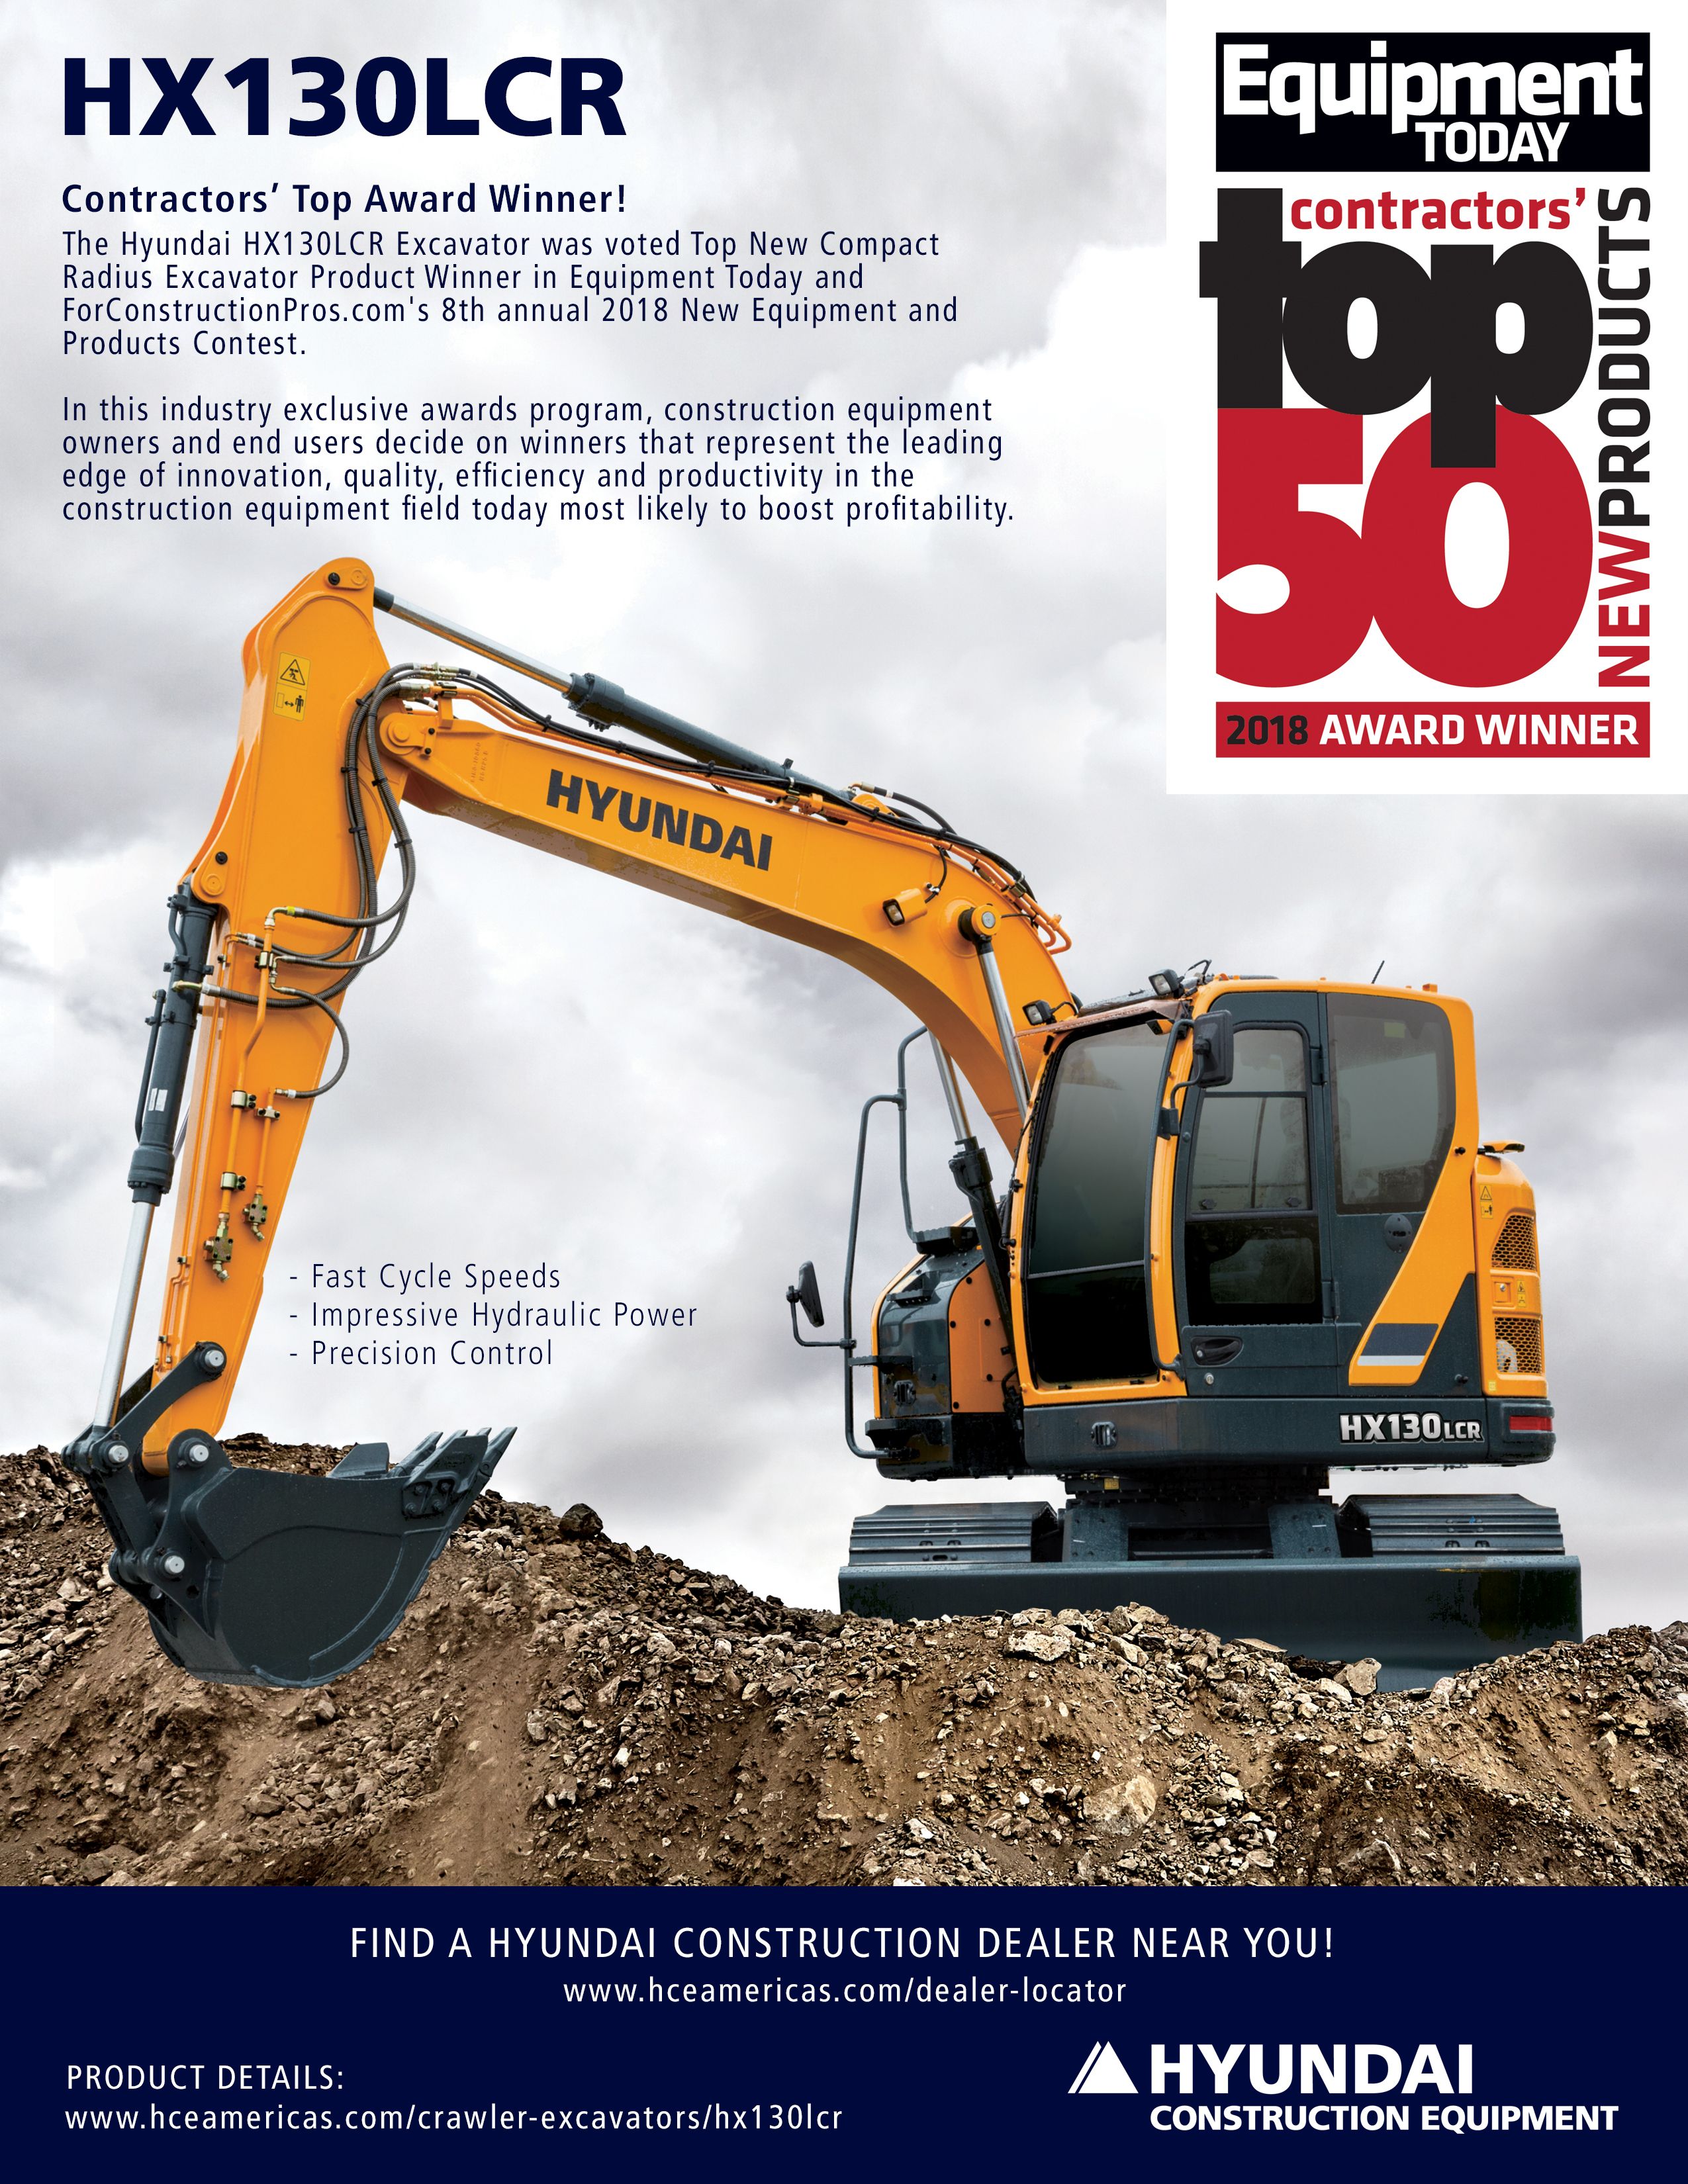 HX130LCR Wins “Top New Compact Radius Excavator Award” In Equipment Today & ForConstructionPros.com’s 2018 Annual Contest